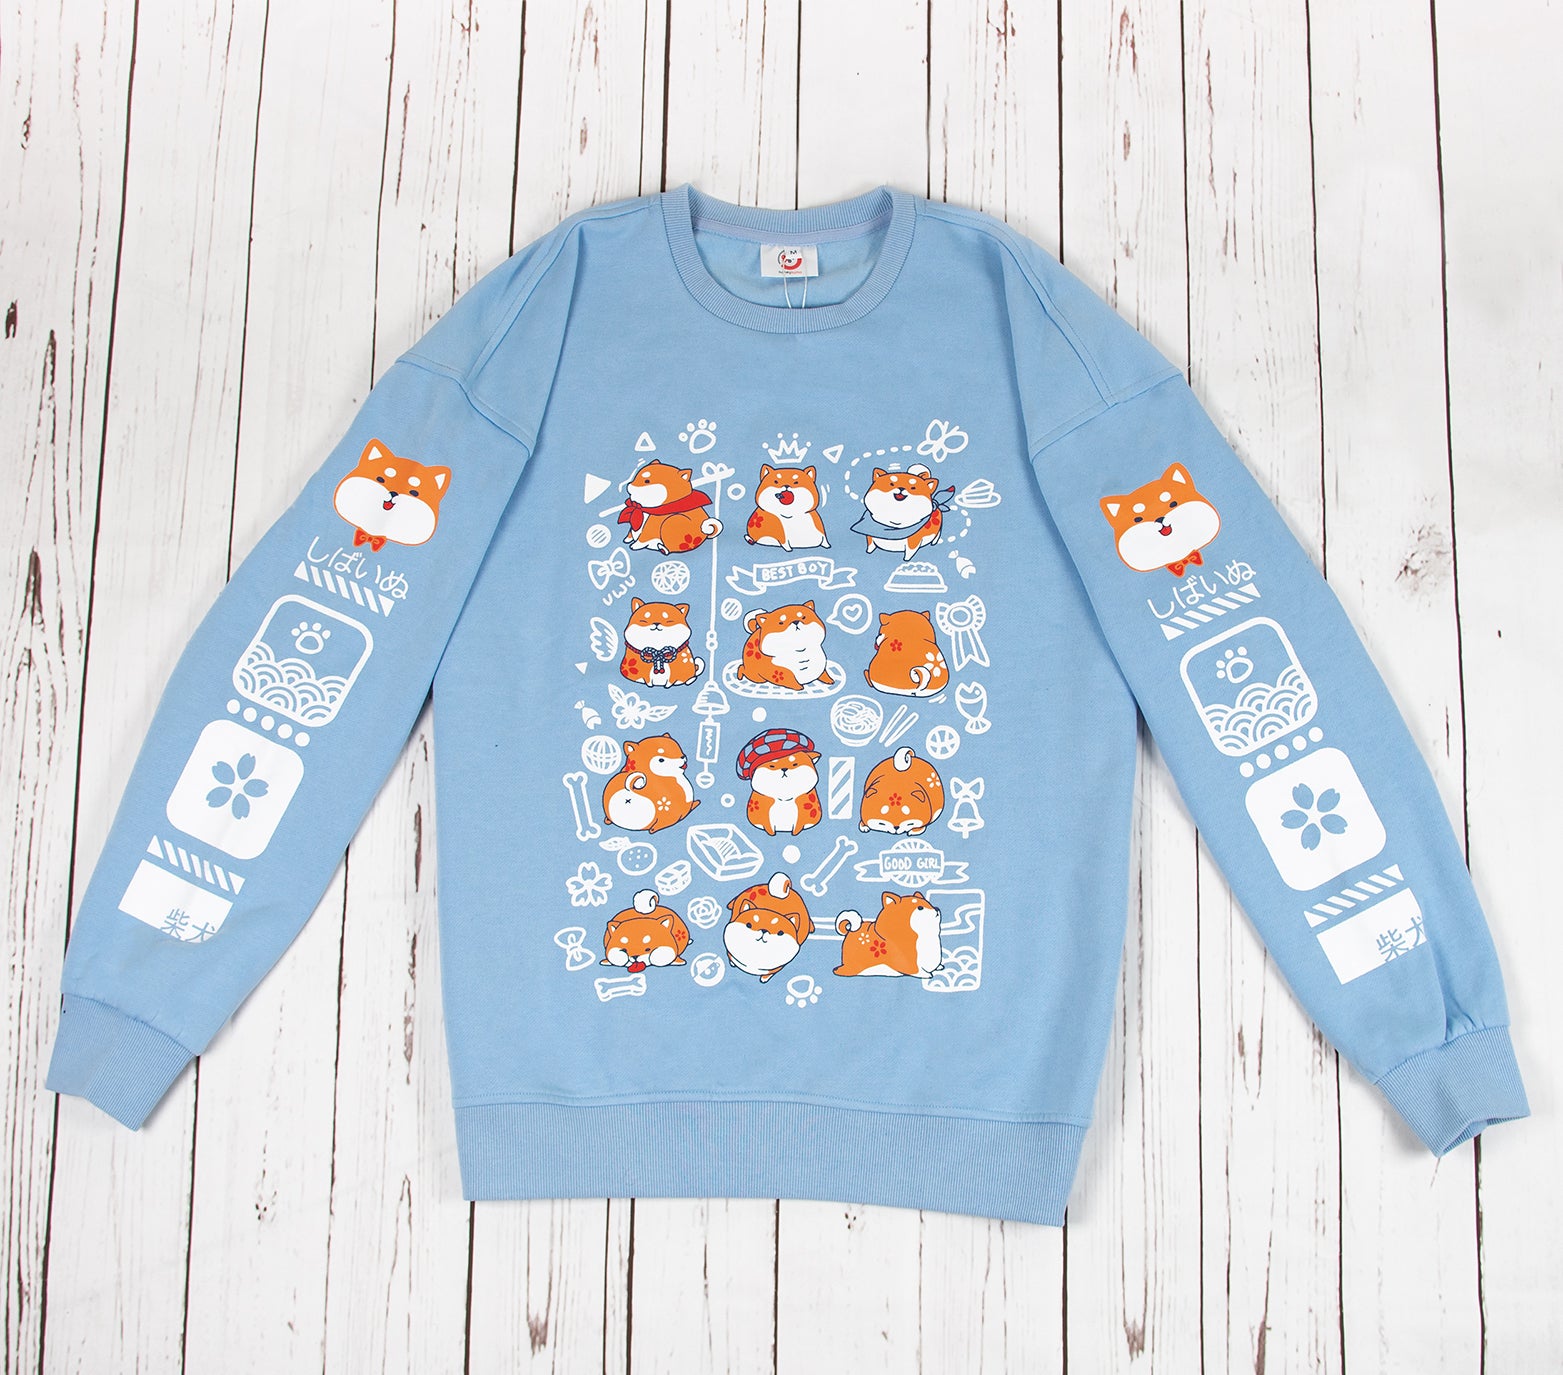 This light blue sweatshirt features a front design of a group of shiba inu in various adorable poses. The design captures the various antics of the shiba inu. Both sleeves also feature designs that run down the sleeves, which matches the front main design of the sweatshirt. The material is medium heavy jersey style with a soft fleece interior. The sweatshirt comes in sizes from XXS to 2XL. 